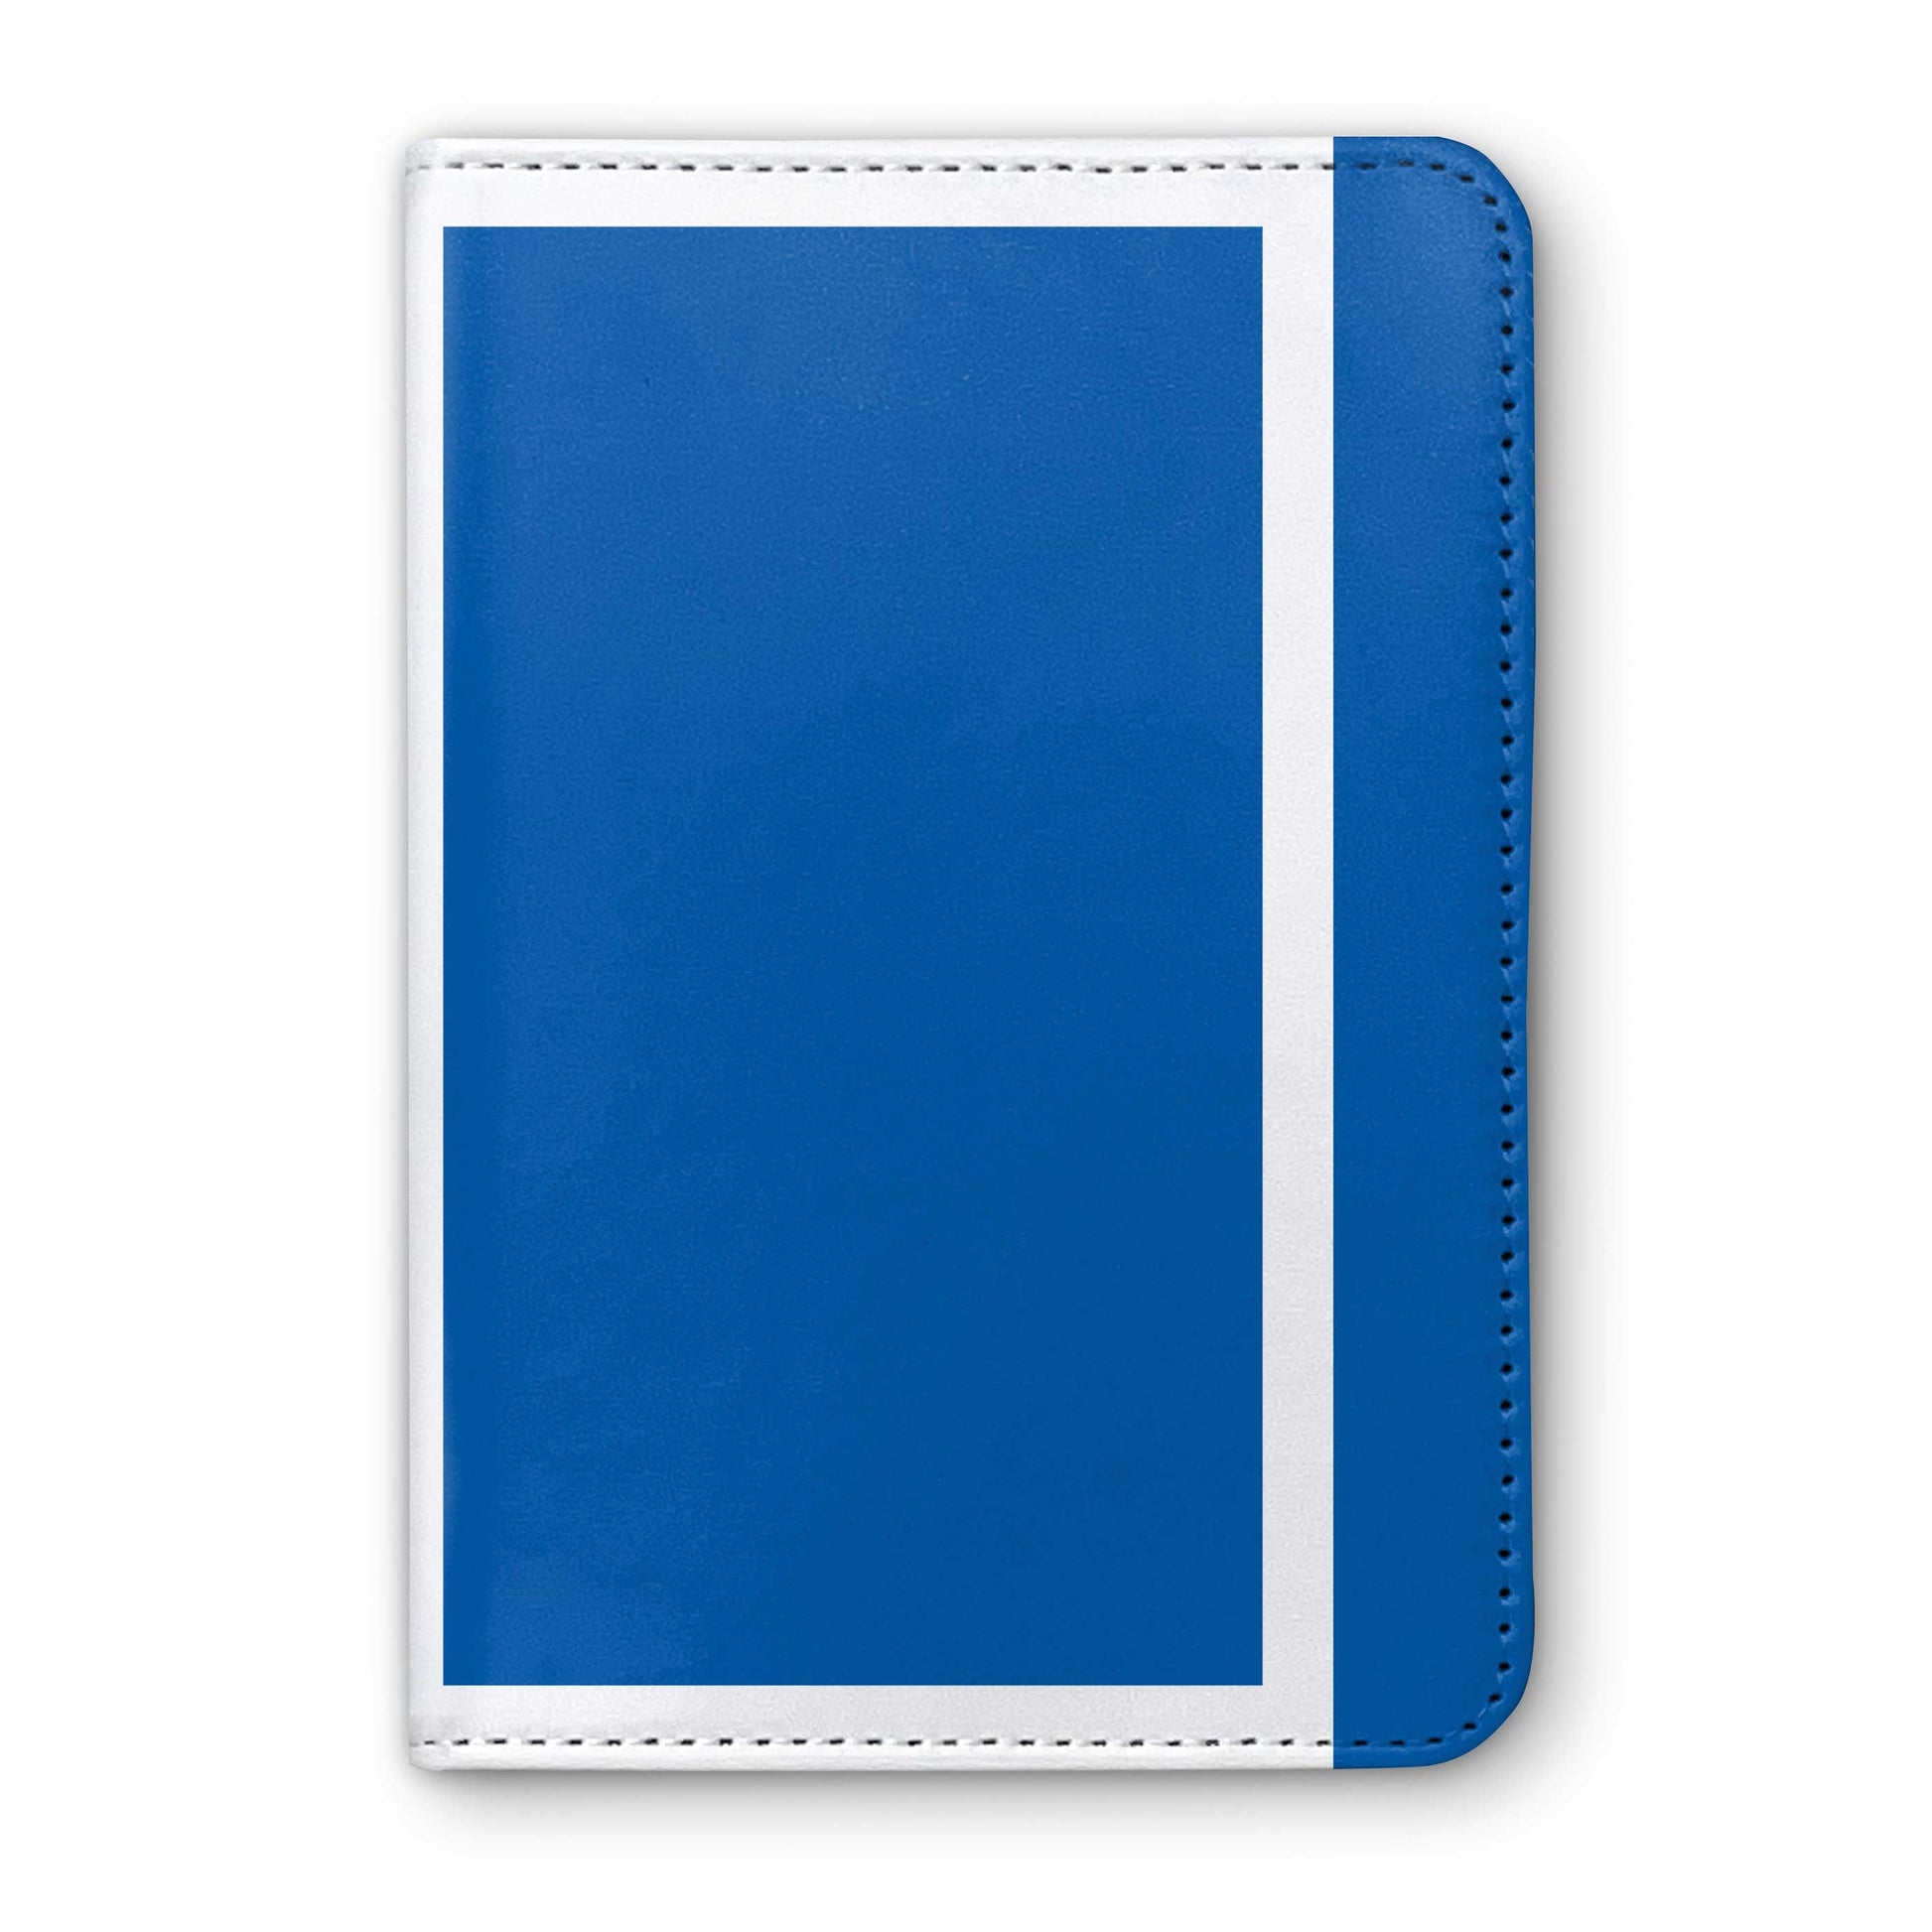 Tony Bloom Horse Racing Passport Holder - Hacked Up Horse Racing Gifts